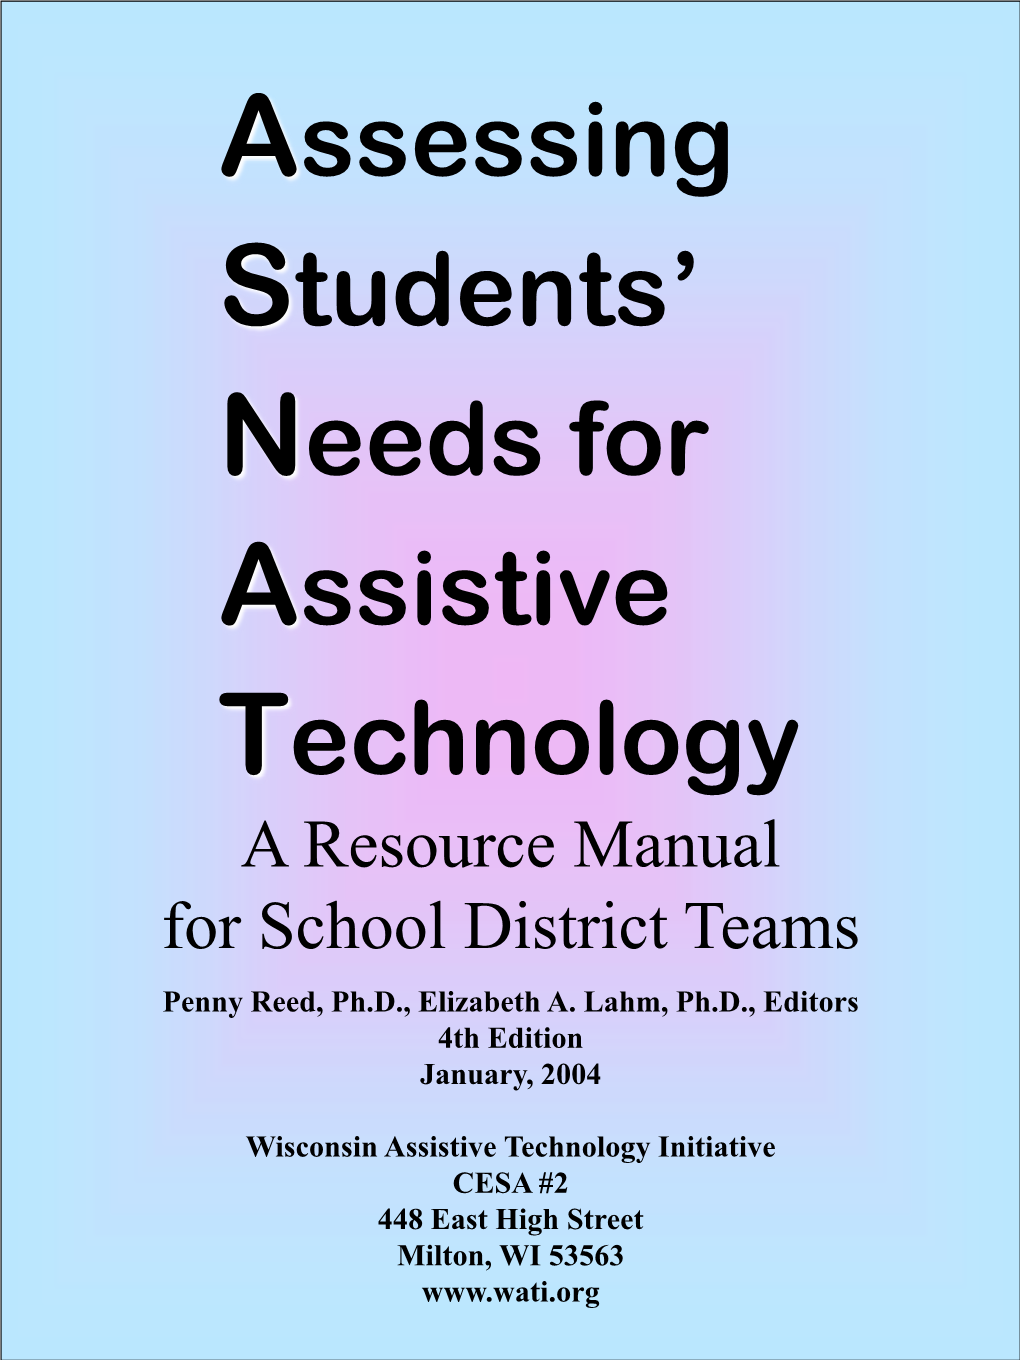 Assessing Students' Needs for Assistive Technology